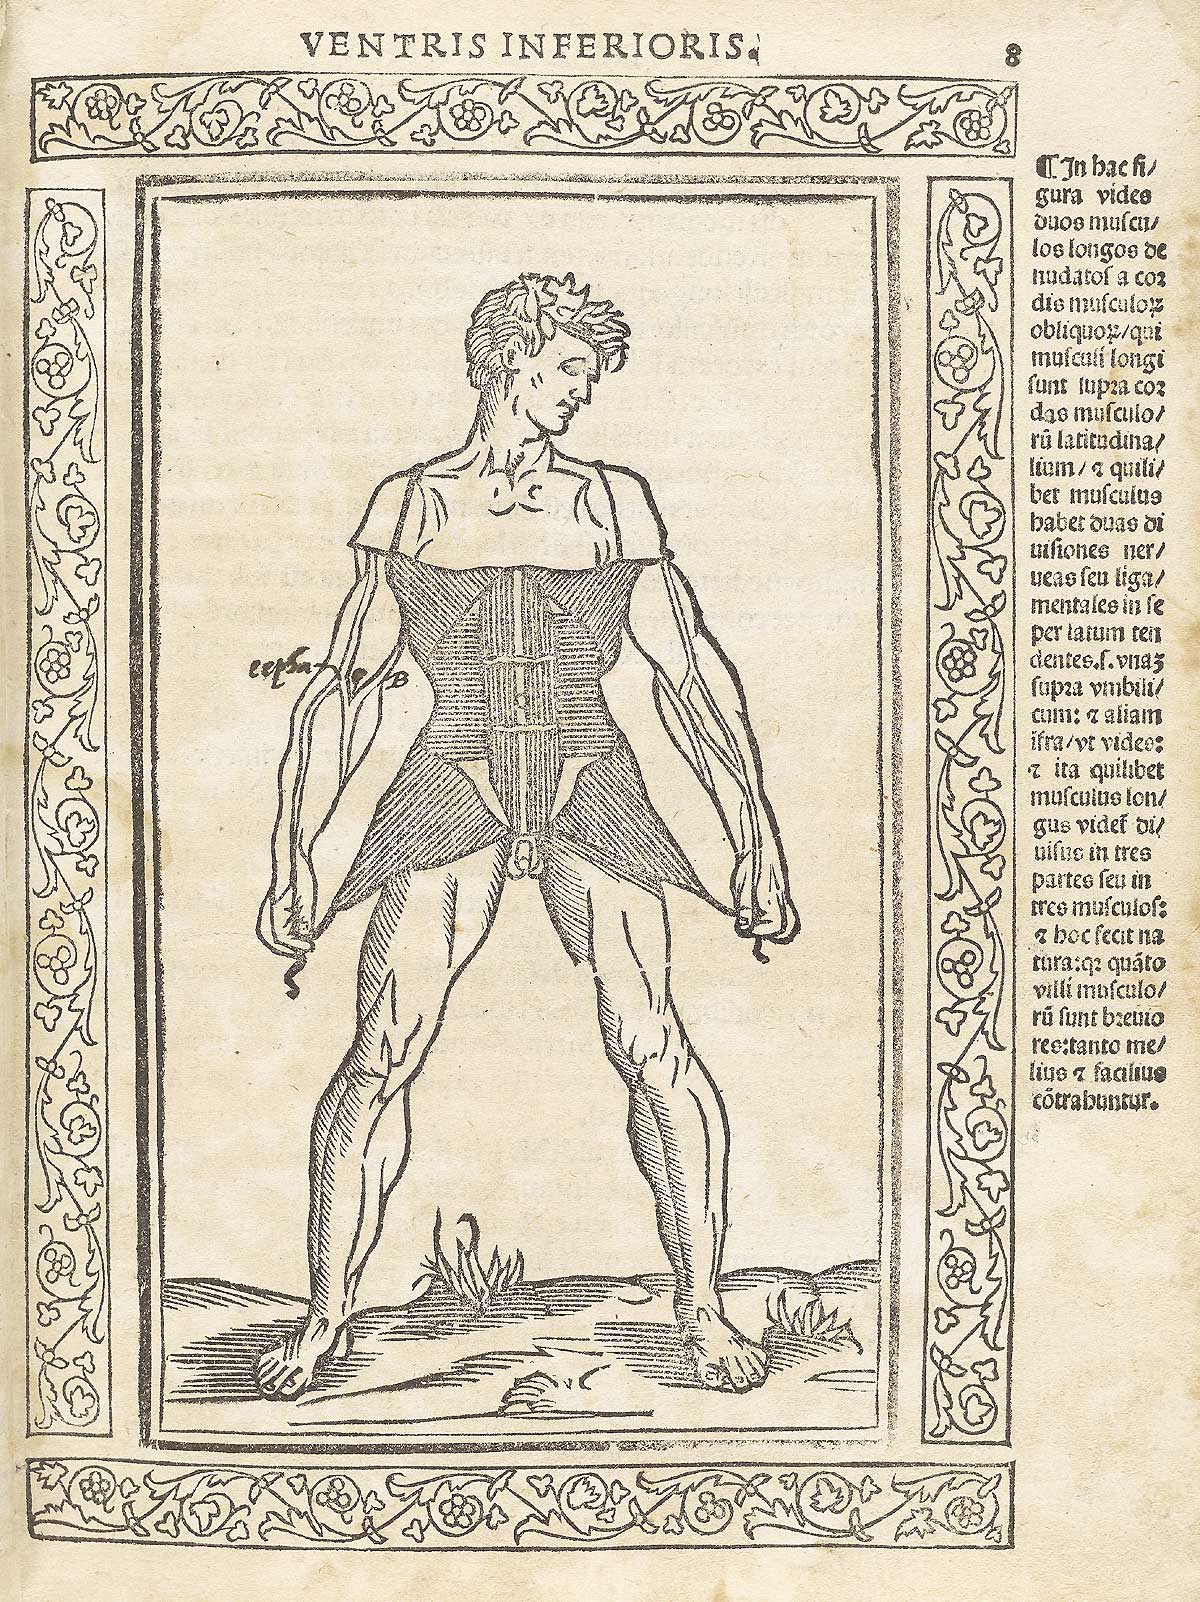 Woodcut of male anatomical figure raising the skin to give a view of his oblique, abdominal, and arm muscles, with a woodcut border and text in Latin on the left side of page, from Berengario da Carpi’s Isagogae breues, Bologna, 1523, NLM Call no. WZ 240 B488i 1523.